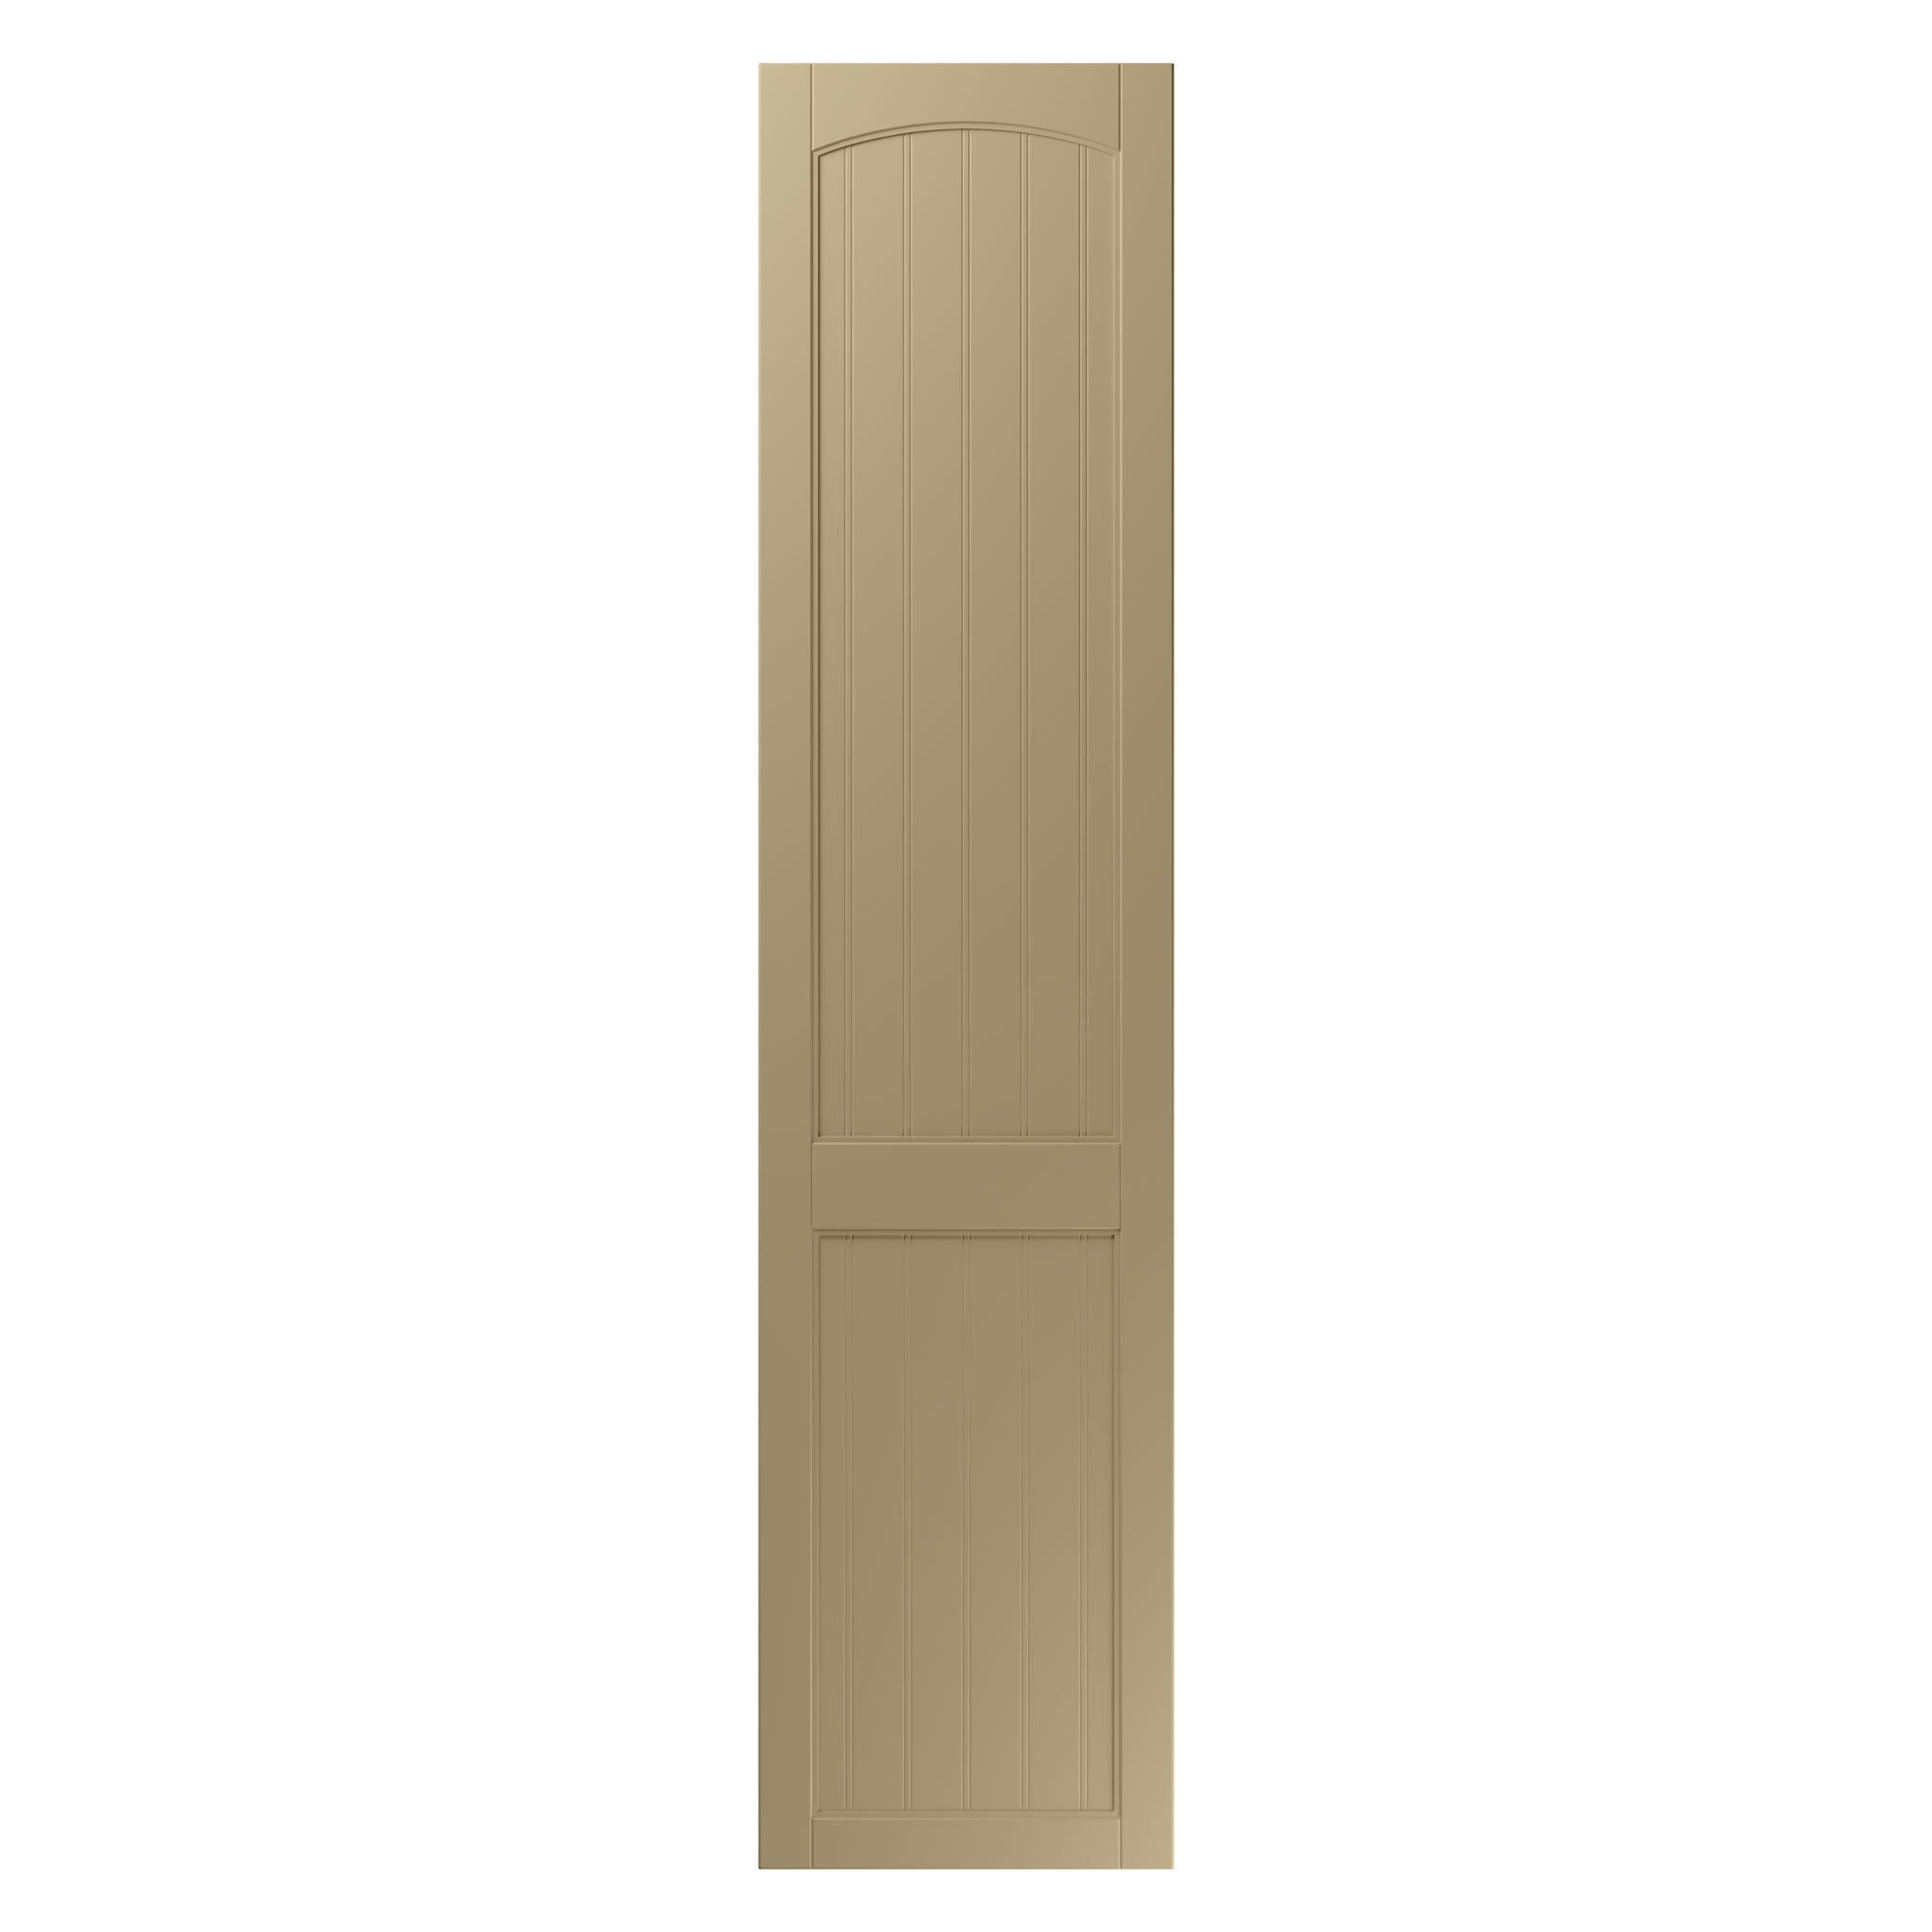 Made to measure Sutton style door